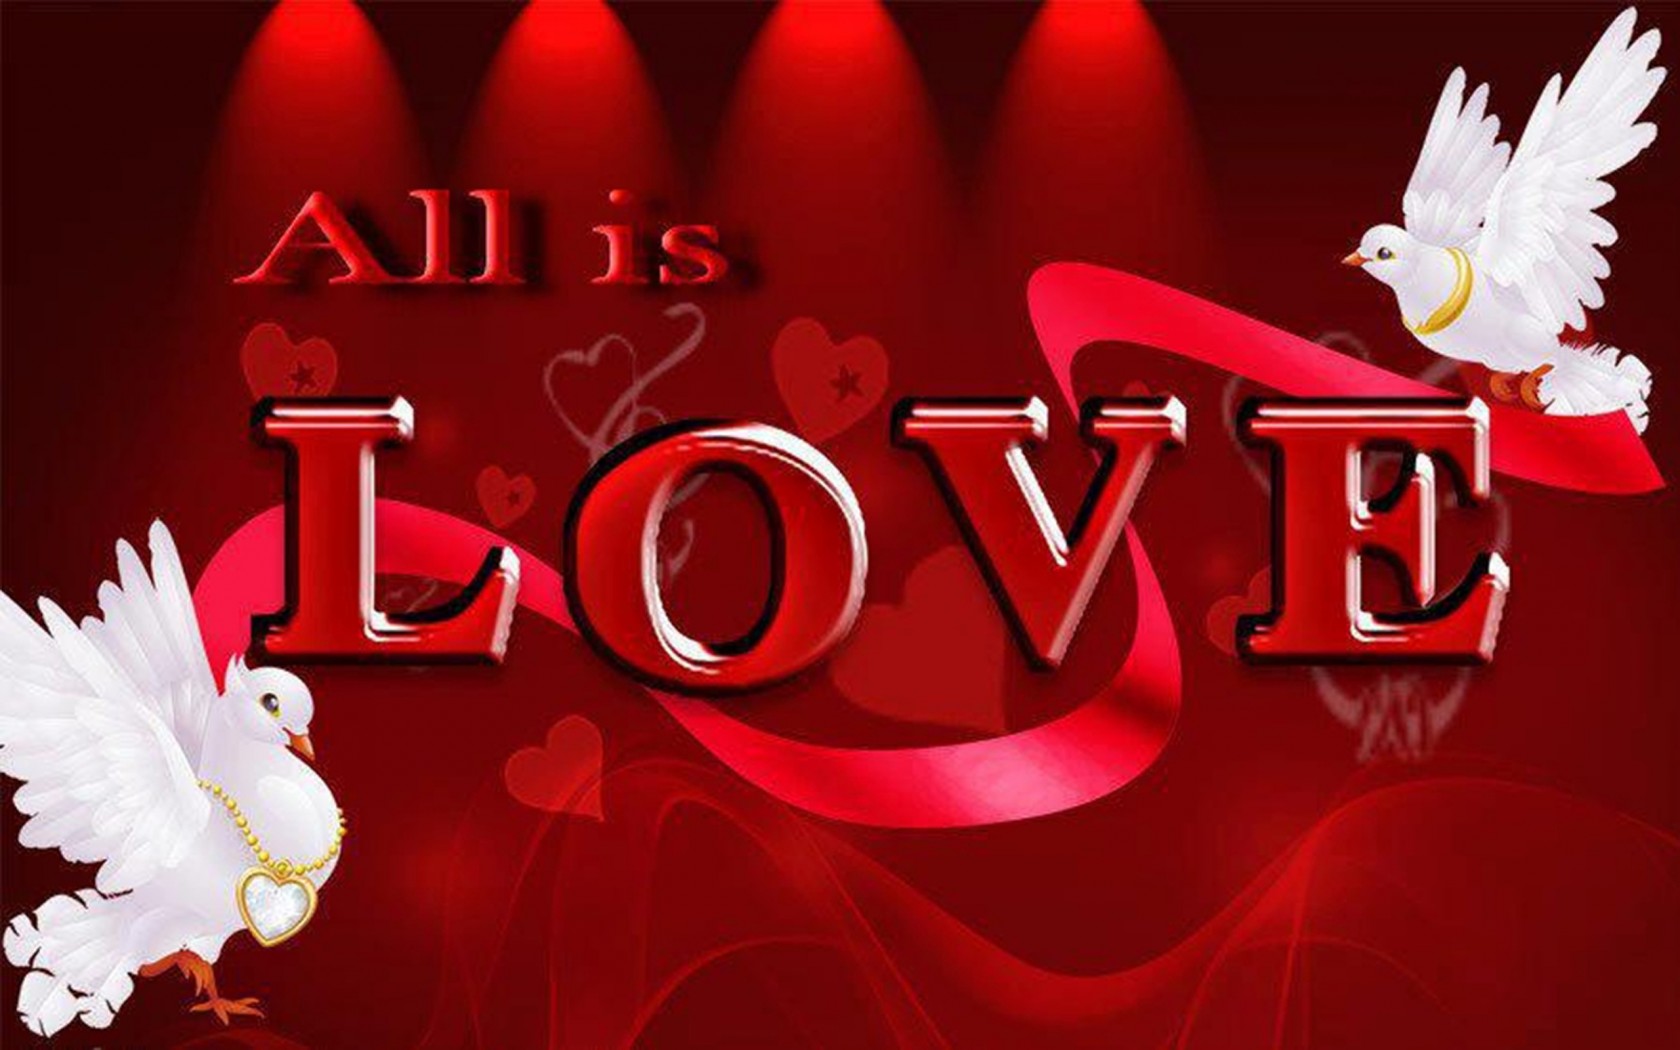 all love wallpaper,red,text,font,graphic design,illustration